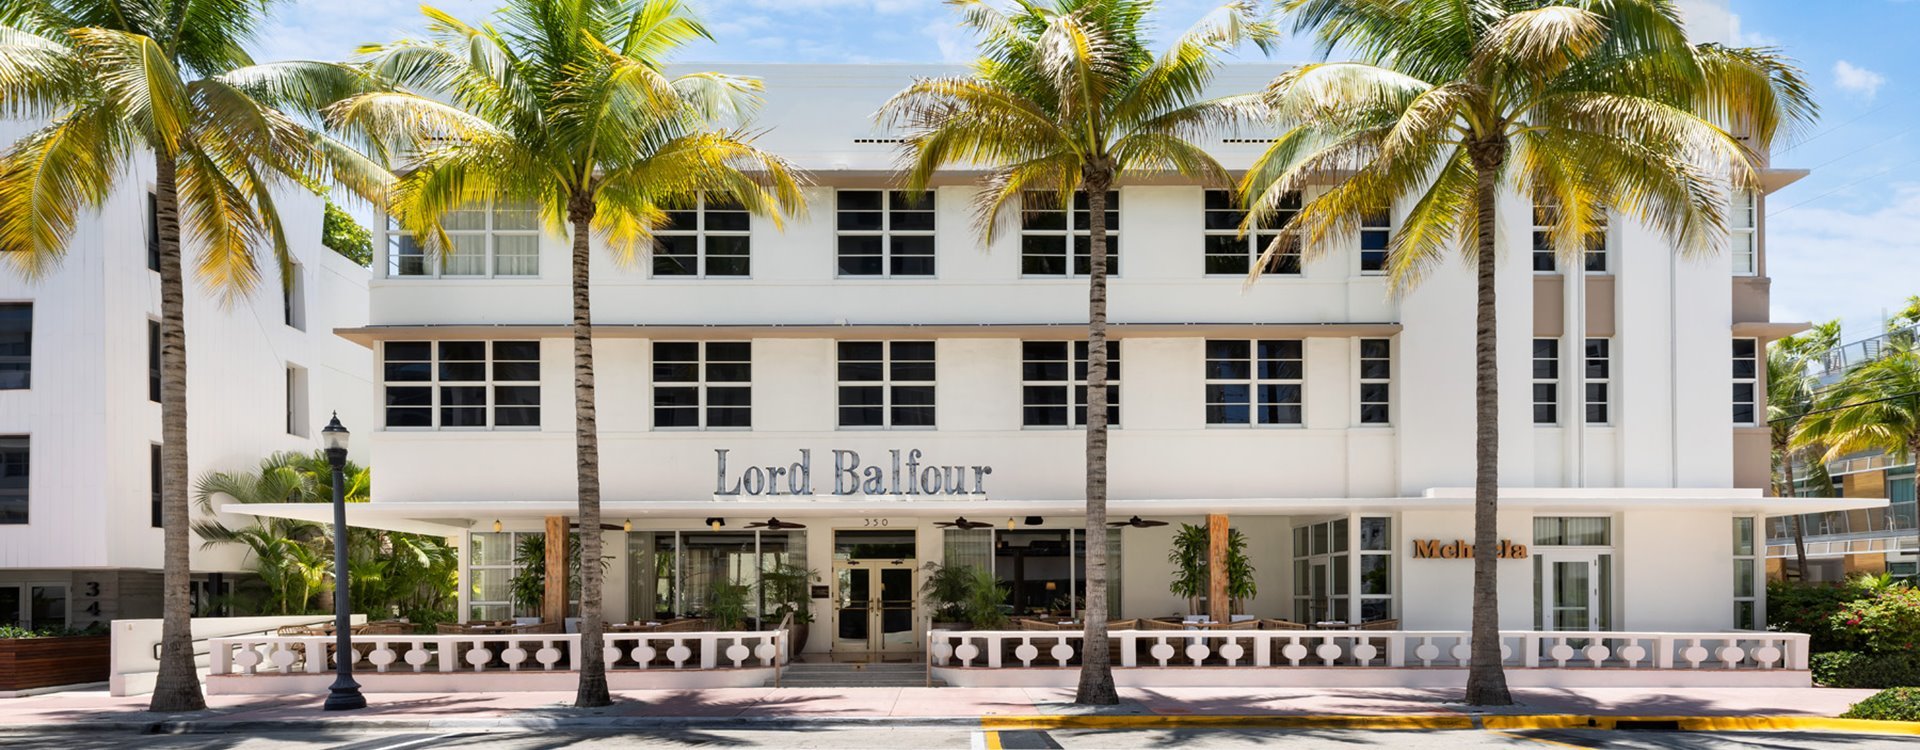 https://www.thebalfourmiamibeach.com/resourcefiles/homeimages/balfour-exterior-day-july.jpg